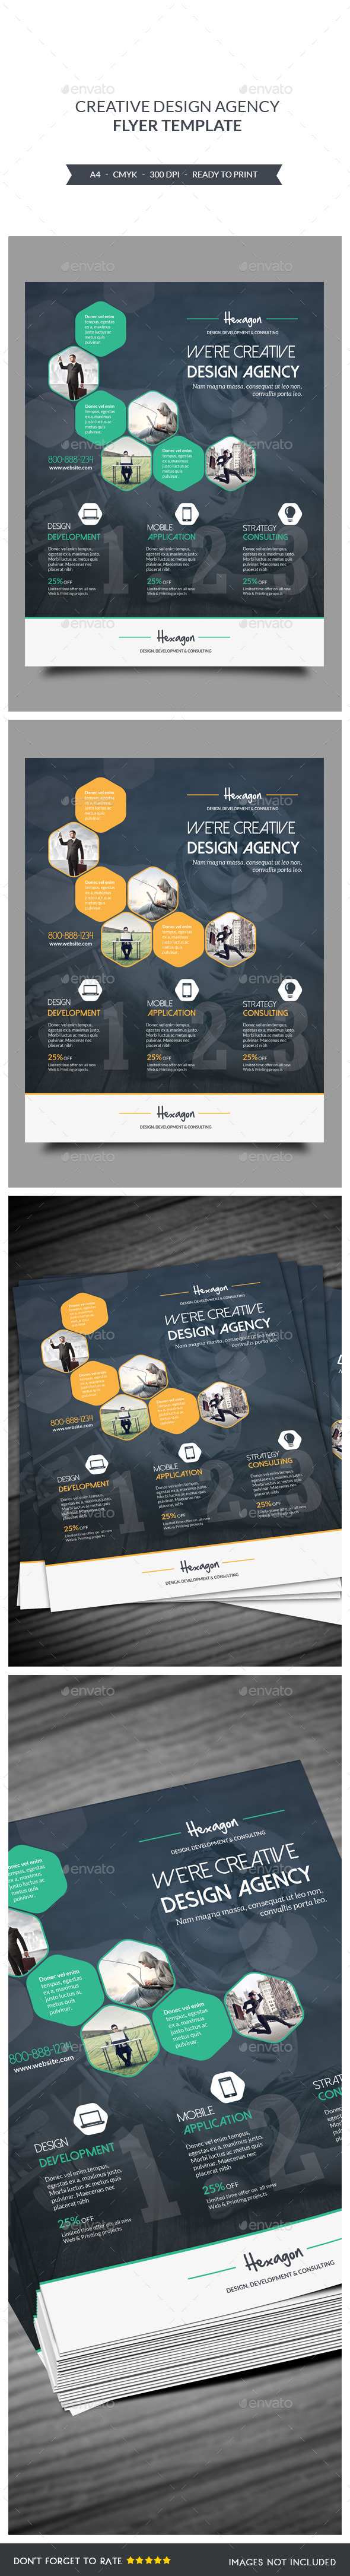 Design Agency Flyers Template